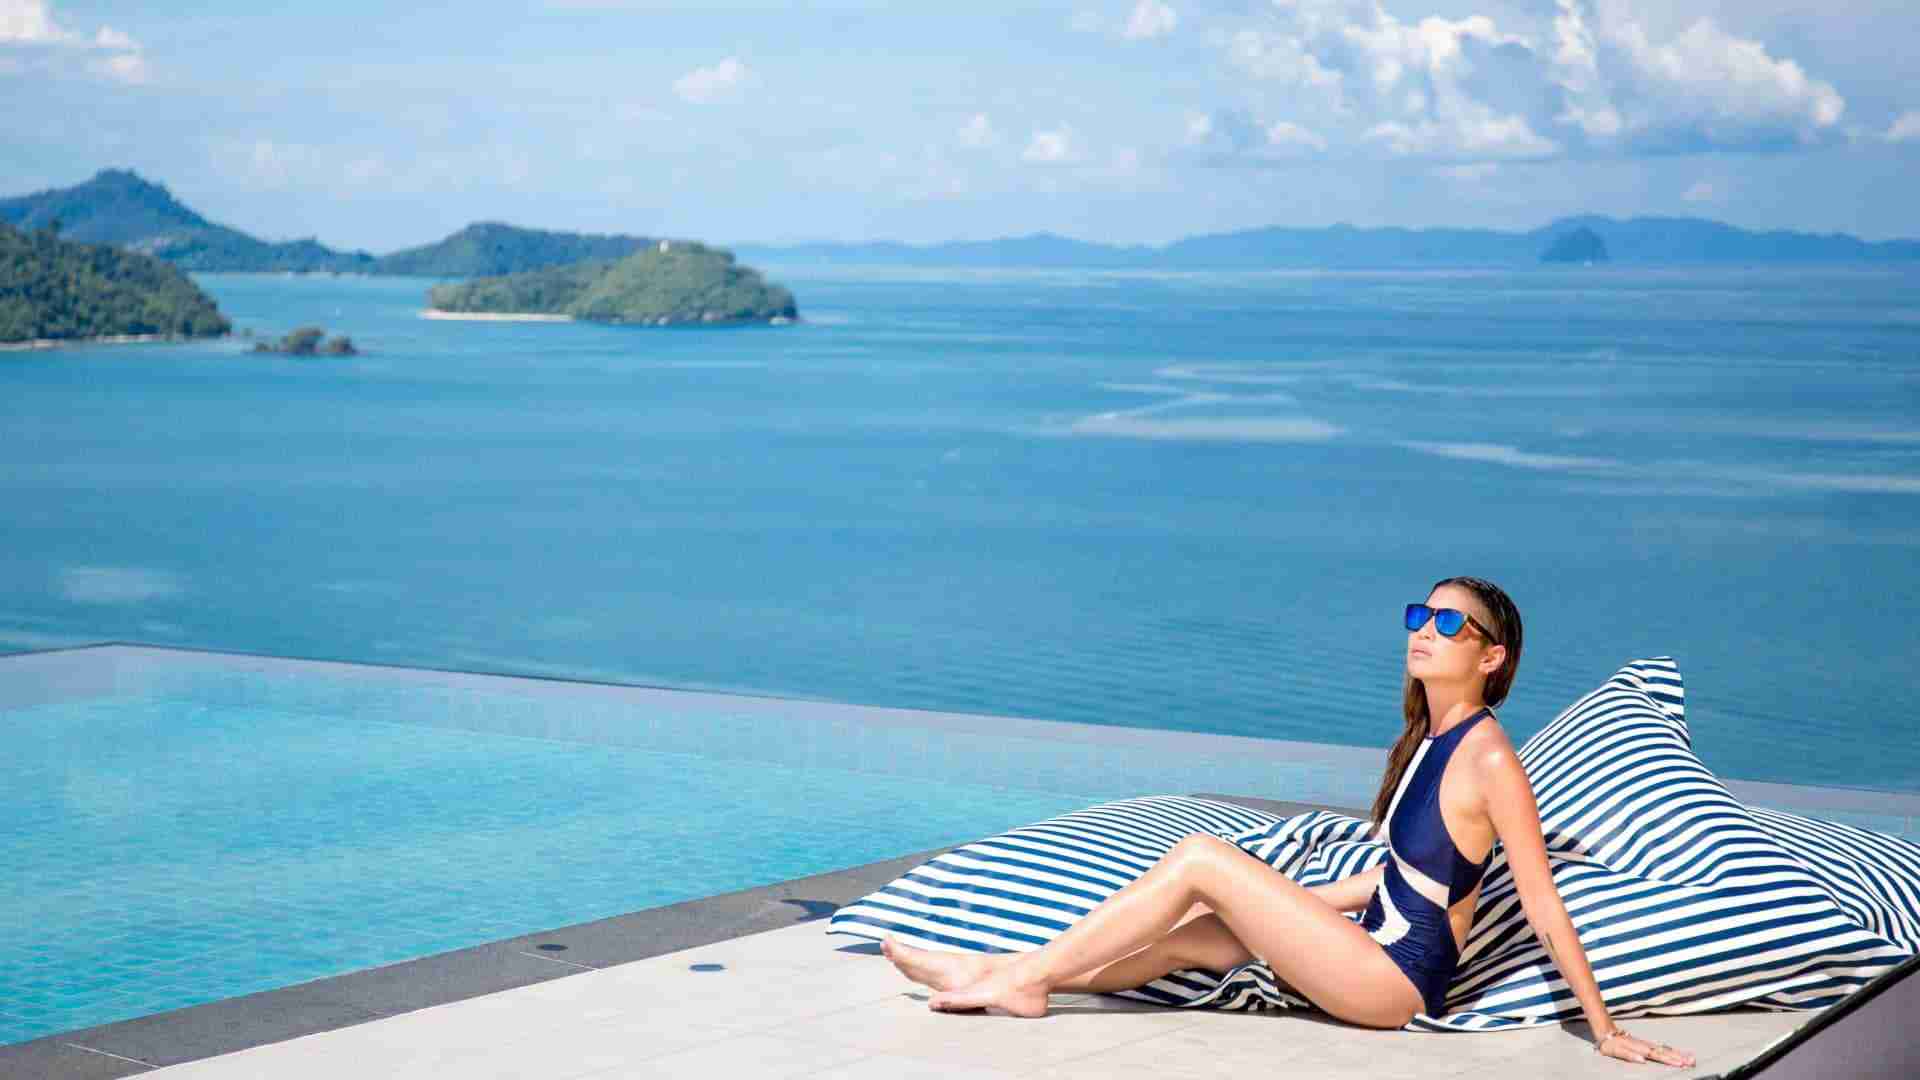 Thai girl by an infinity pool with view over the ocean in Phuket Thailand